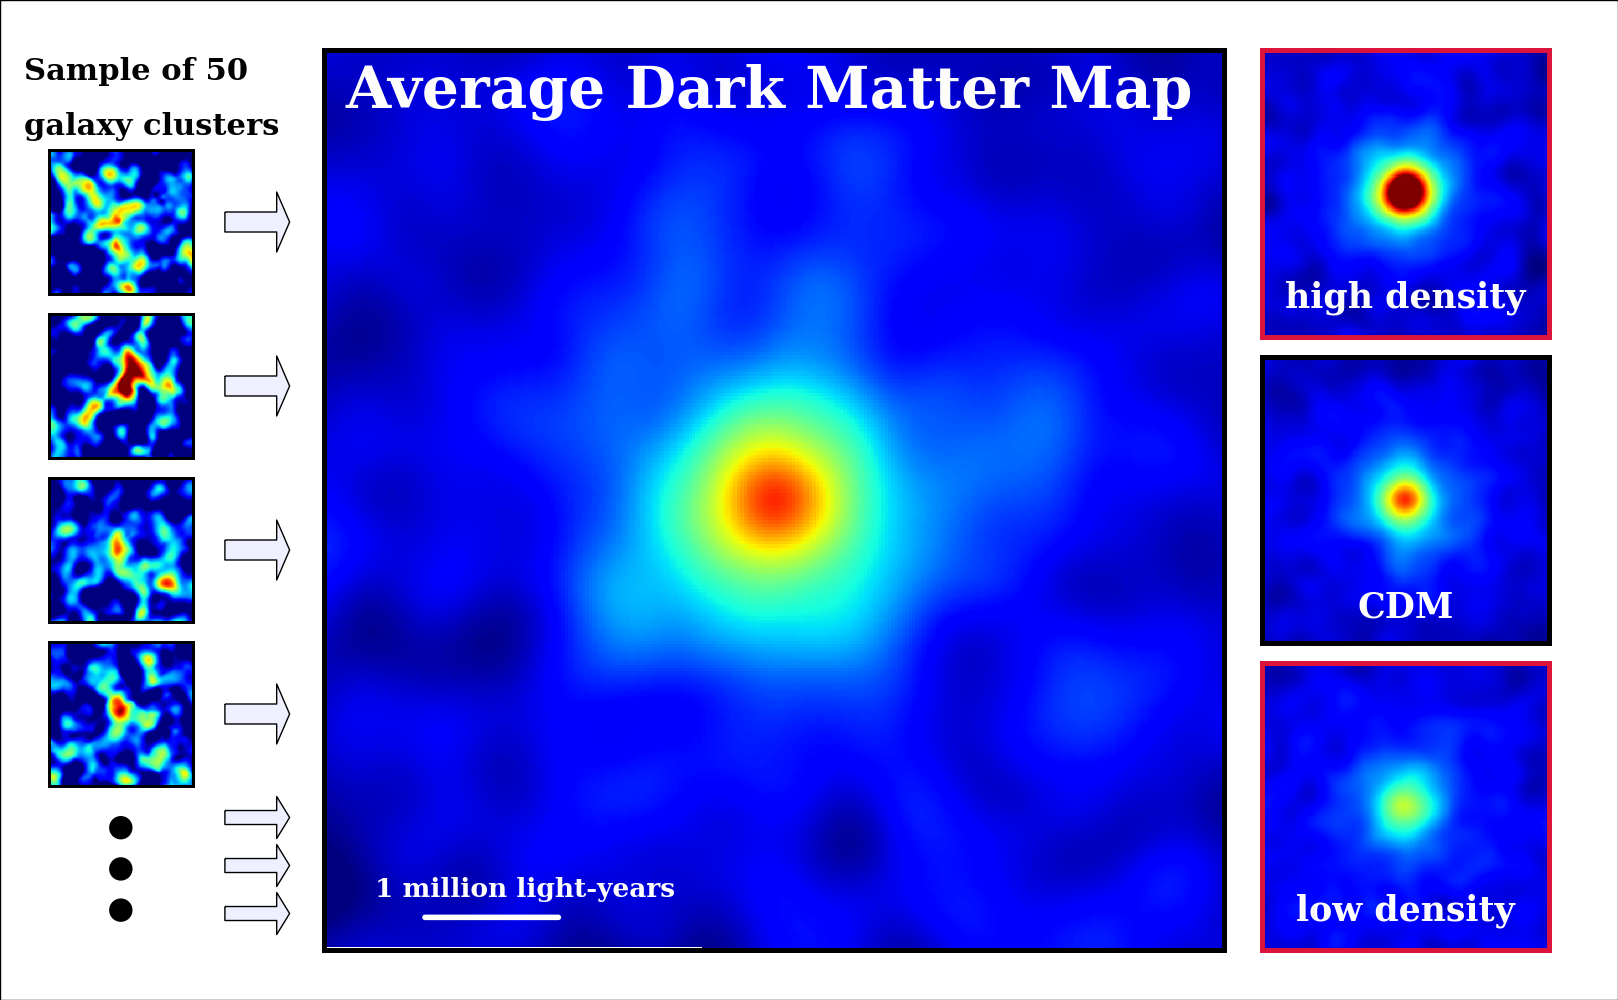 Figure 2: Dark matter maps for a sample of fifty individual galaxy clusters (left), an average galaxy cluster (center), and those based on dark matter theory (right). The density of dark matter increases in the order of blue, green, yellow, and red colors. The white horizontal line represents a scale of one million light-years. The map based on predictions from CDM theory (right, middle) is a close match to the average galaxy cluster observed with the Subaru Telescope. (Credit: NAOJ/ASIAA/School of Physics and Astronomy, University of Birmingham/Kavli IPMU/Astronomical Institute, Tohoku University)